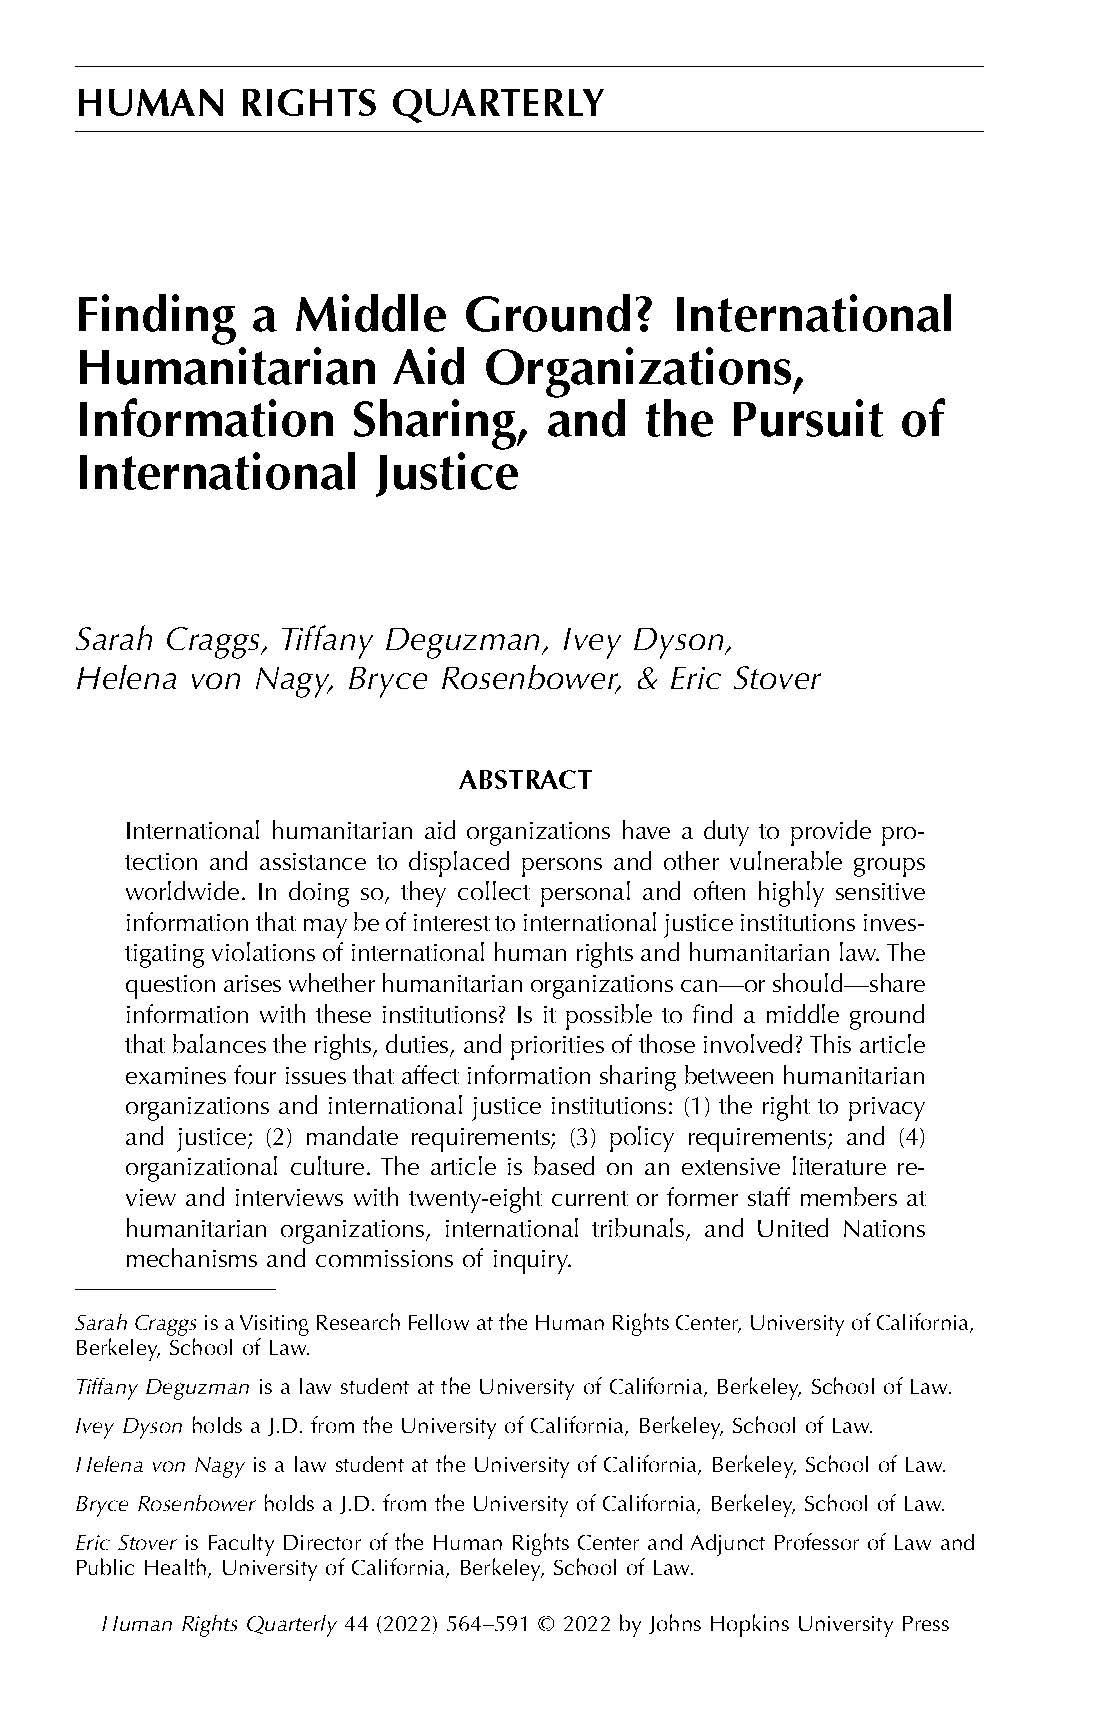 Pages from Finding a Middle Ground? International Humanitarian Aid Organizations, Information Sharing, and the Pursuit of International Justice